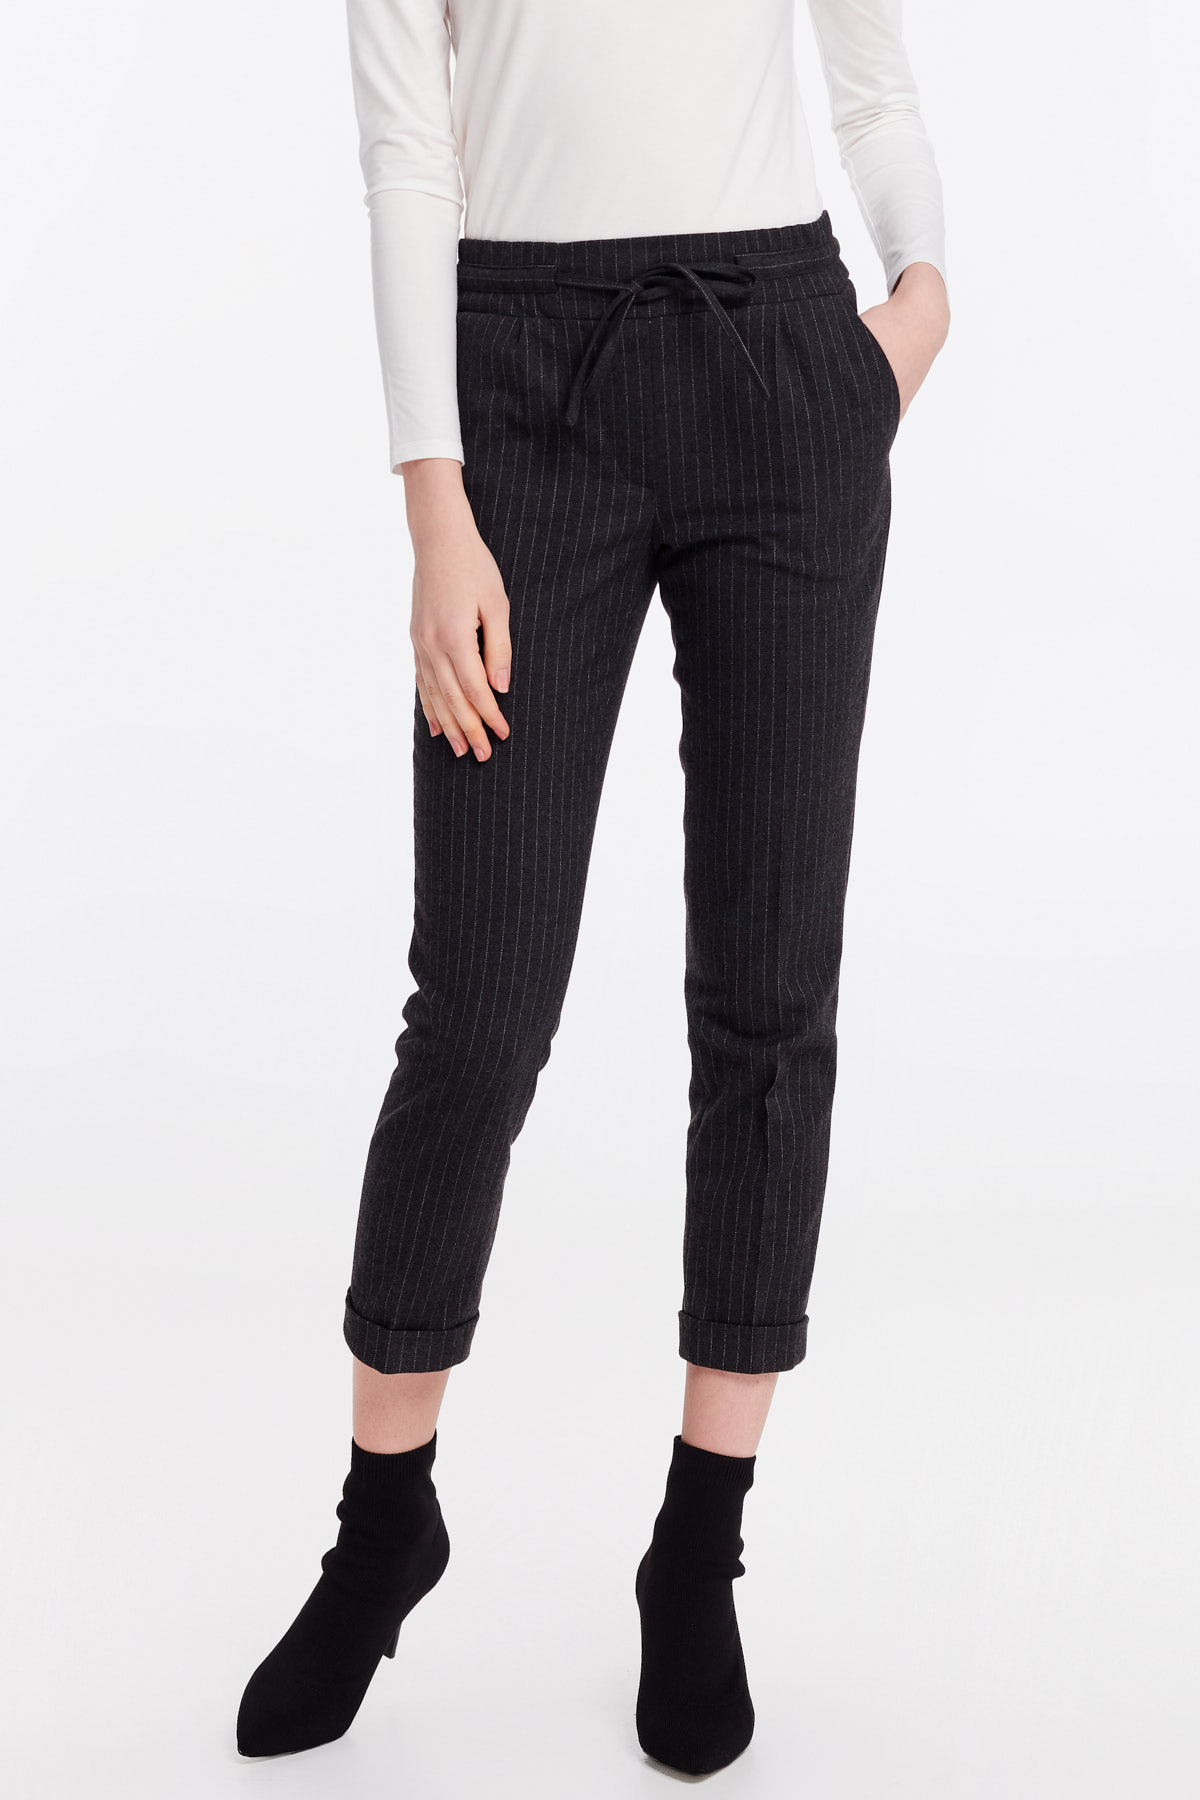 Grey striped pants with an elastic band, photo 1